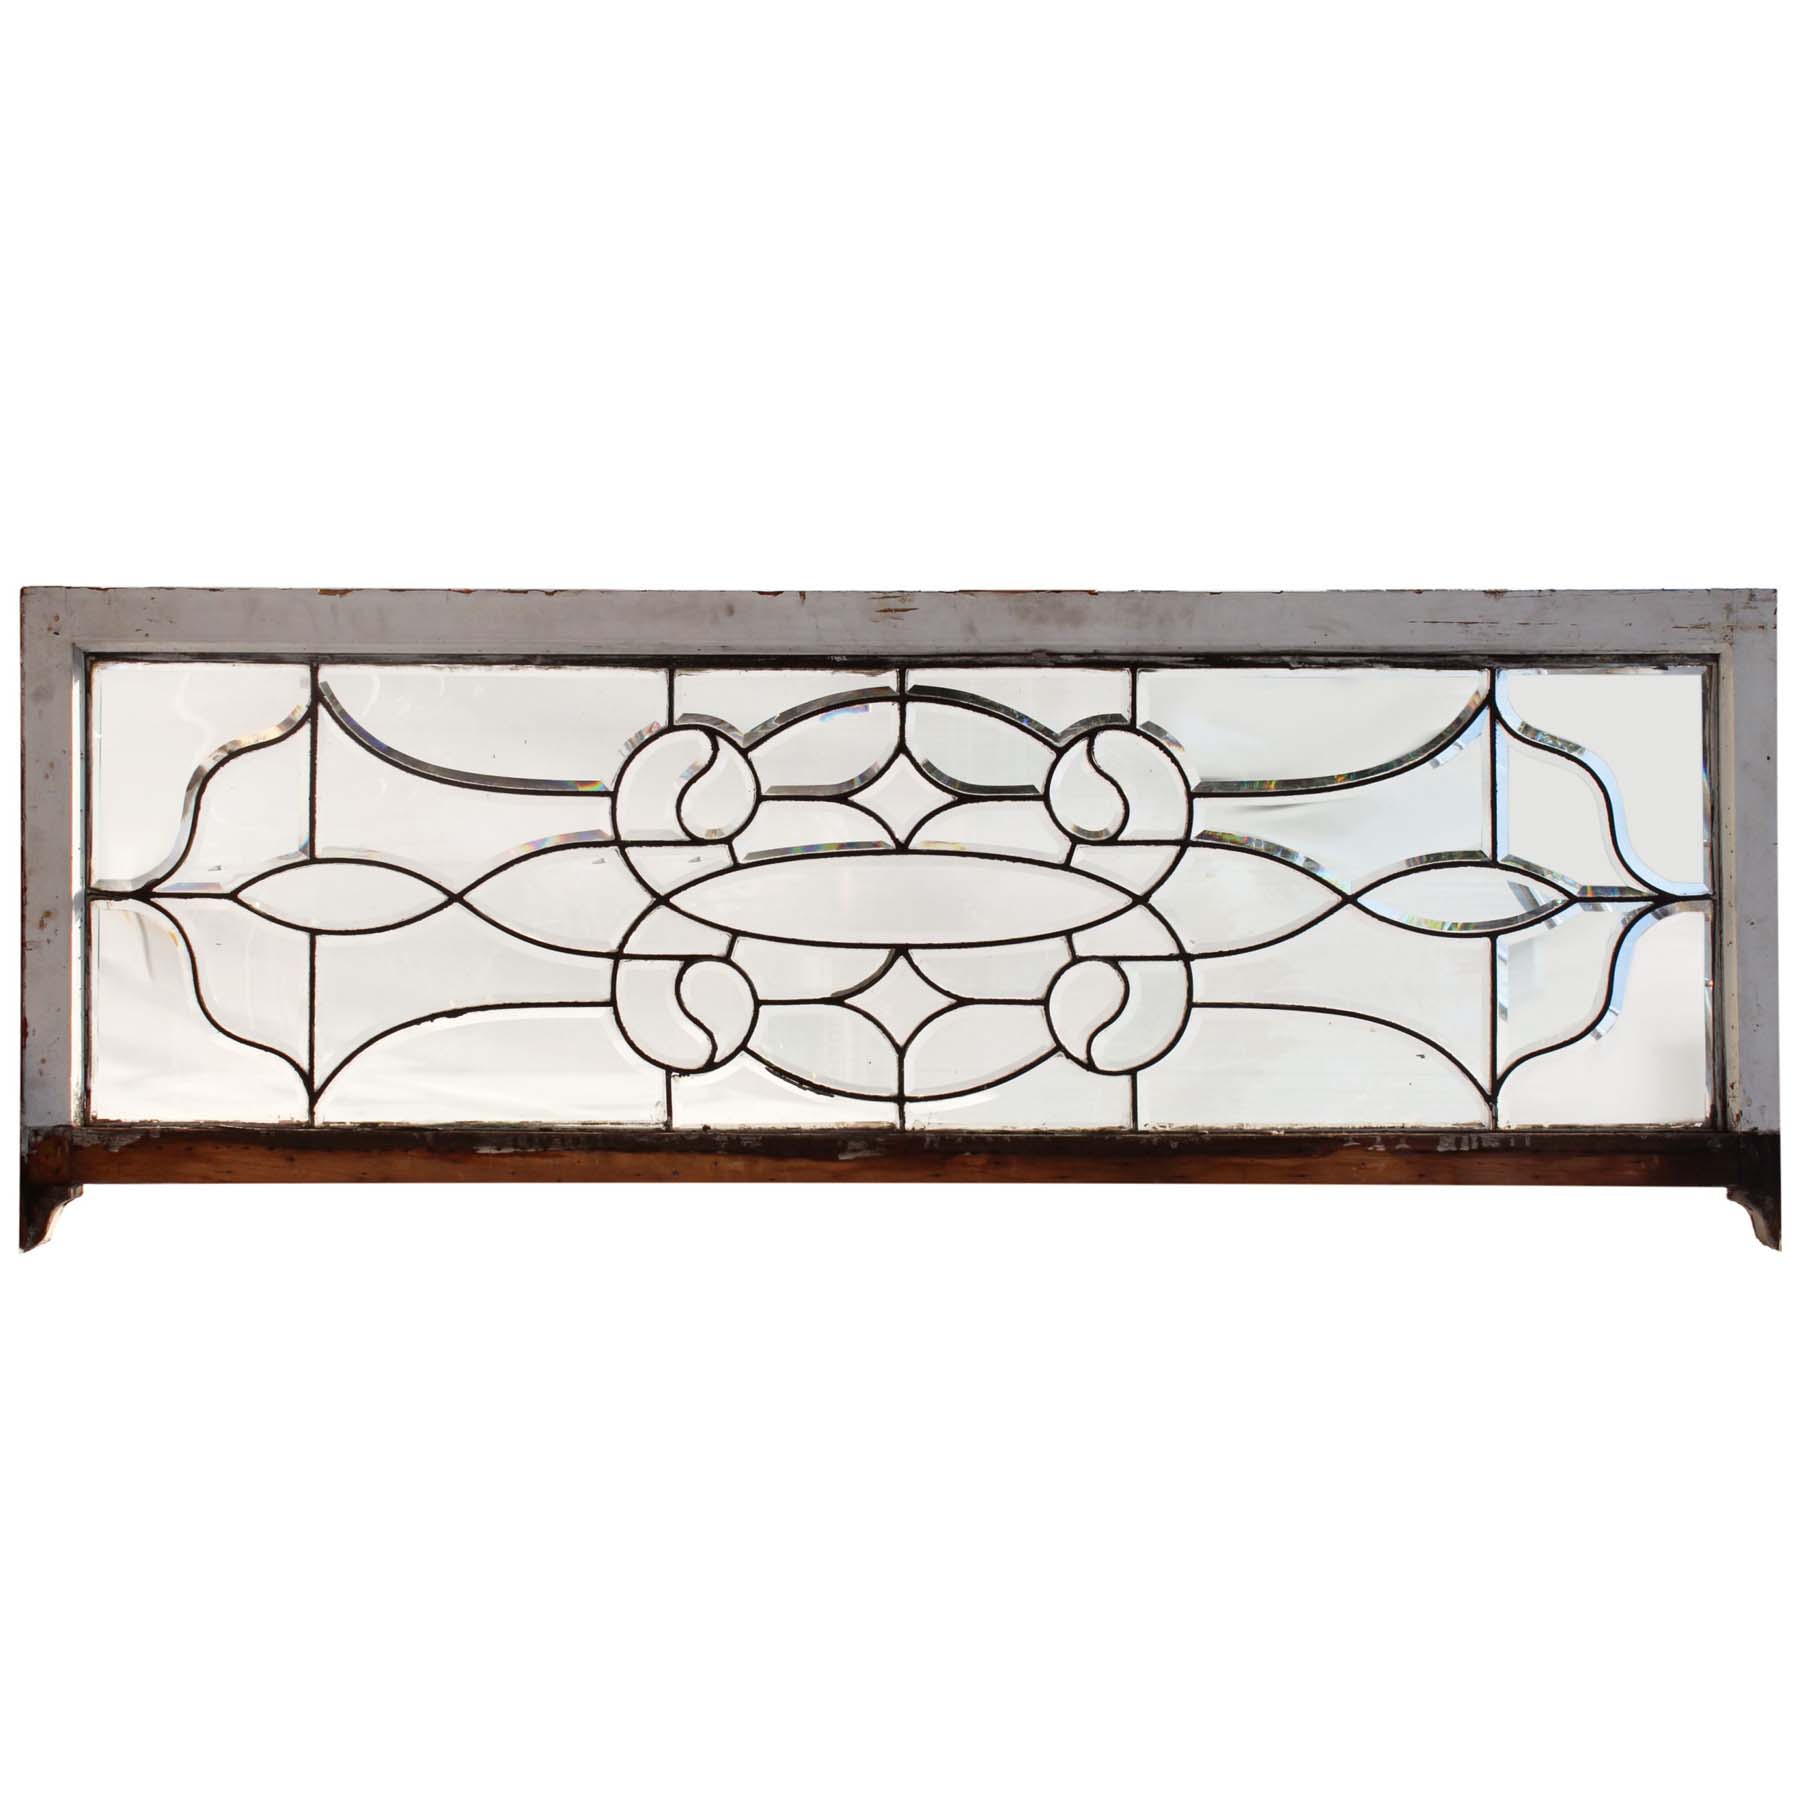 Antique American Leaded & Beveled Glass Transom-69030